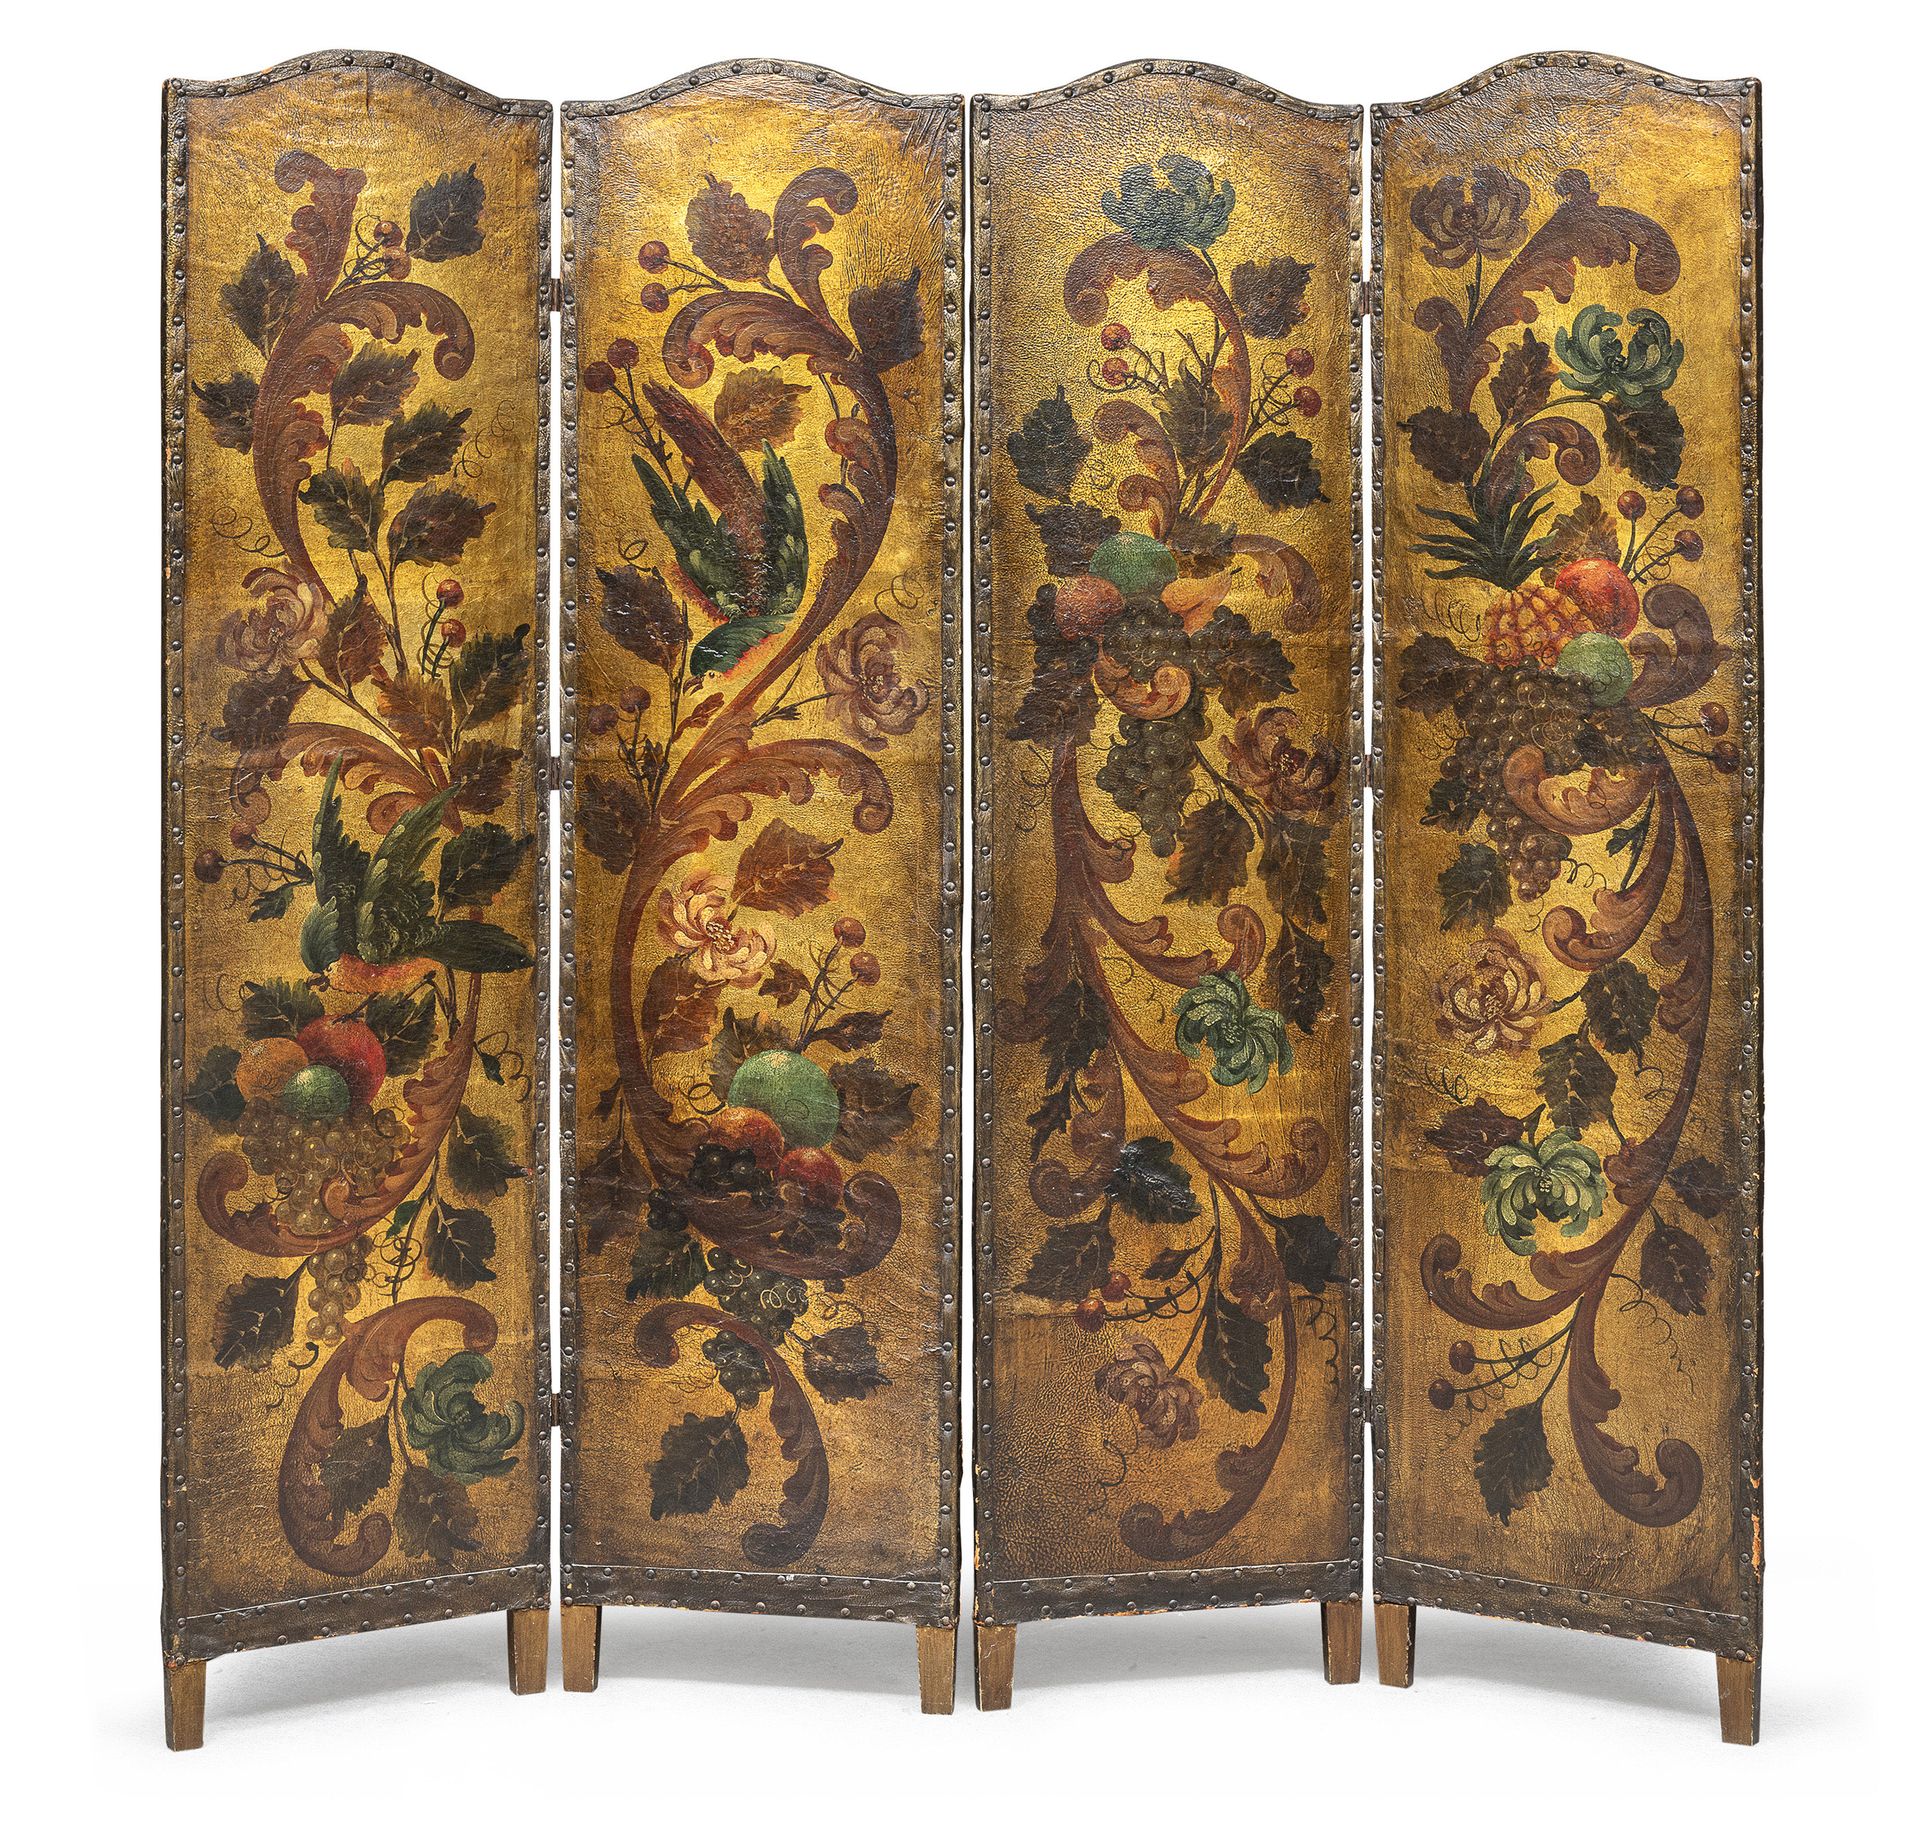 Null CORDOBA LEATHER SCREEN, EARLY XIXTH CENTURY
four-leaf, entirely painted in &hellip;